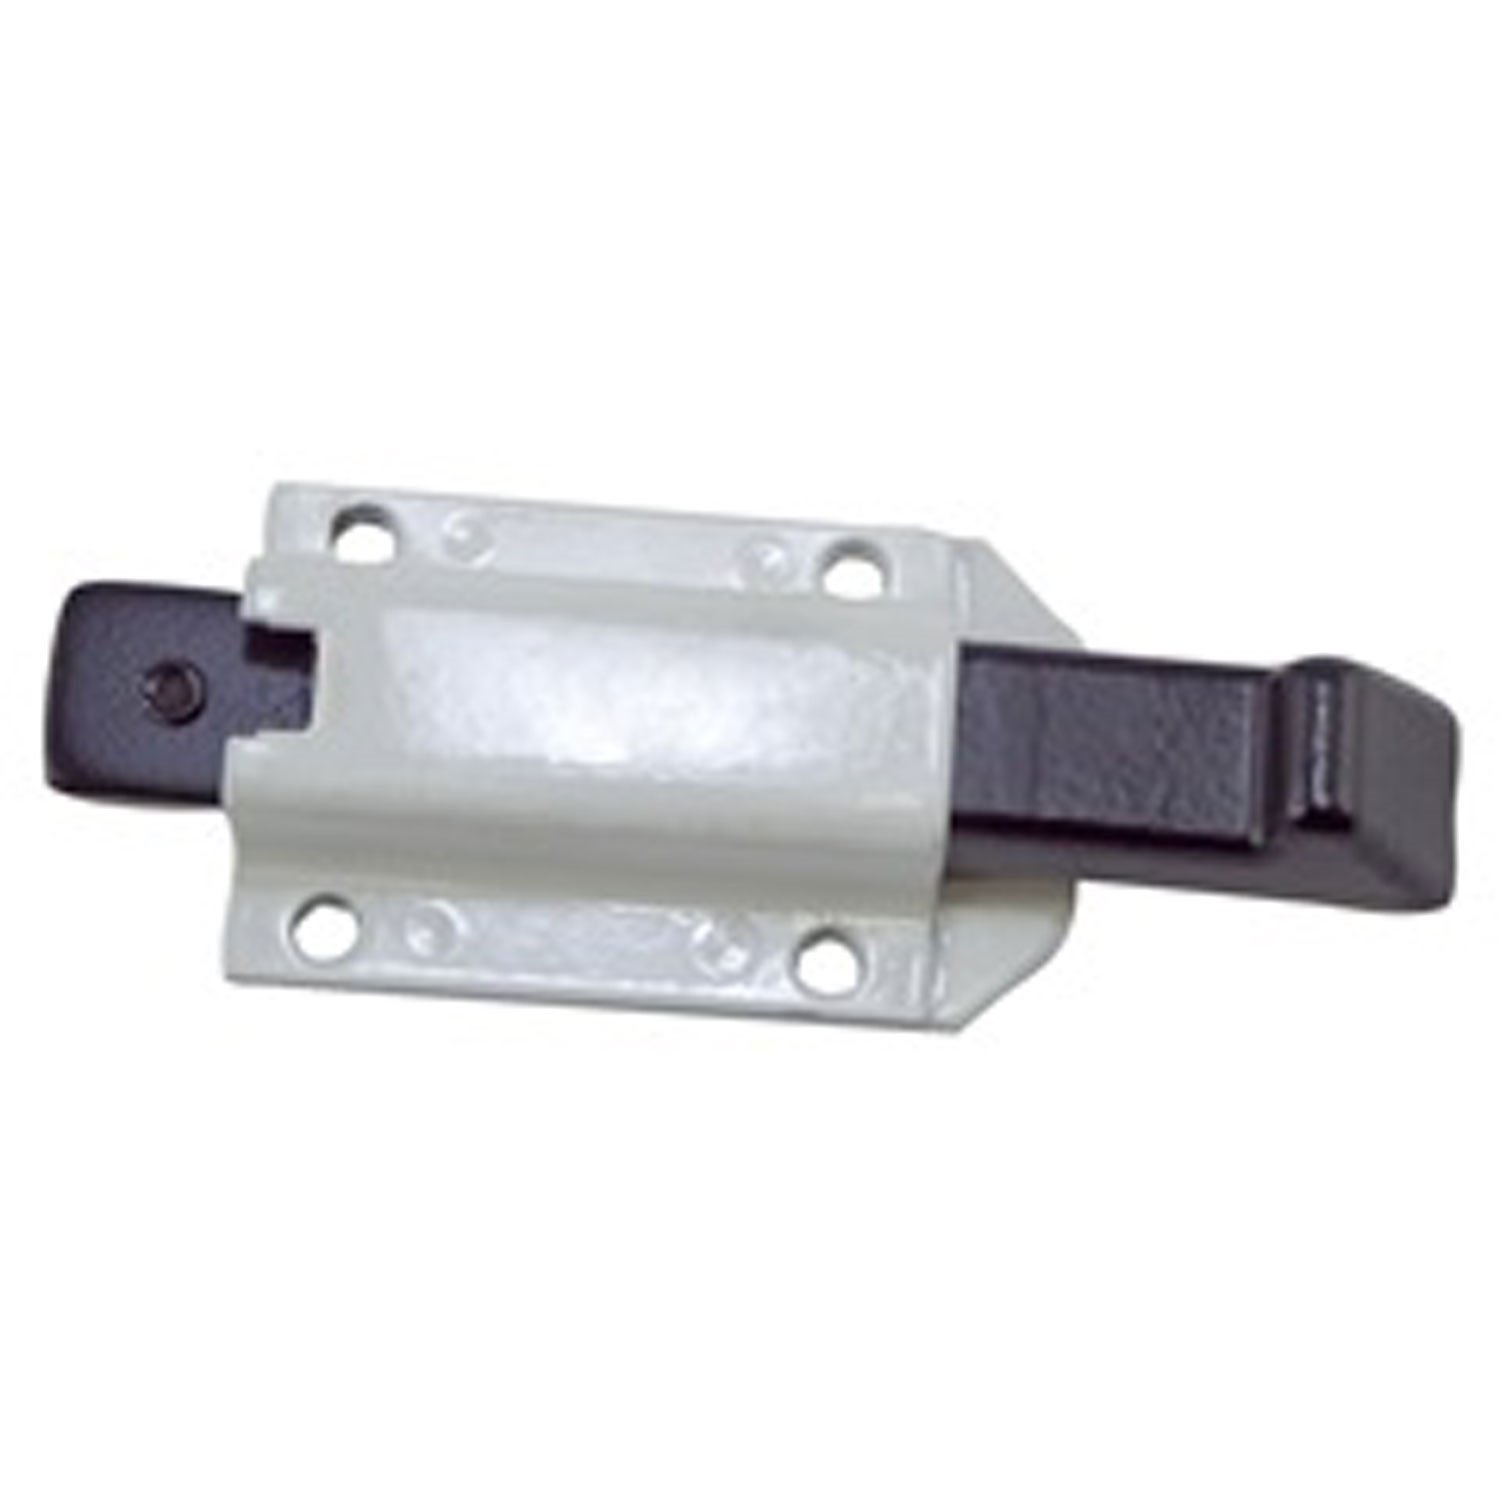 Replacement hardtop liftgate latch from Omix-ADA, Fits 76-86